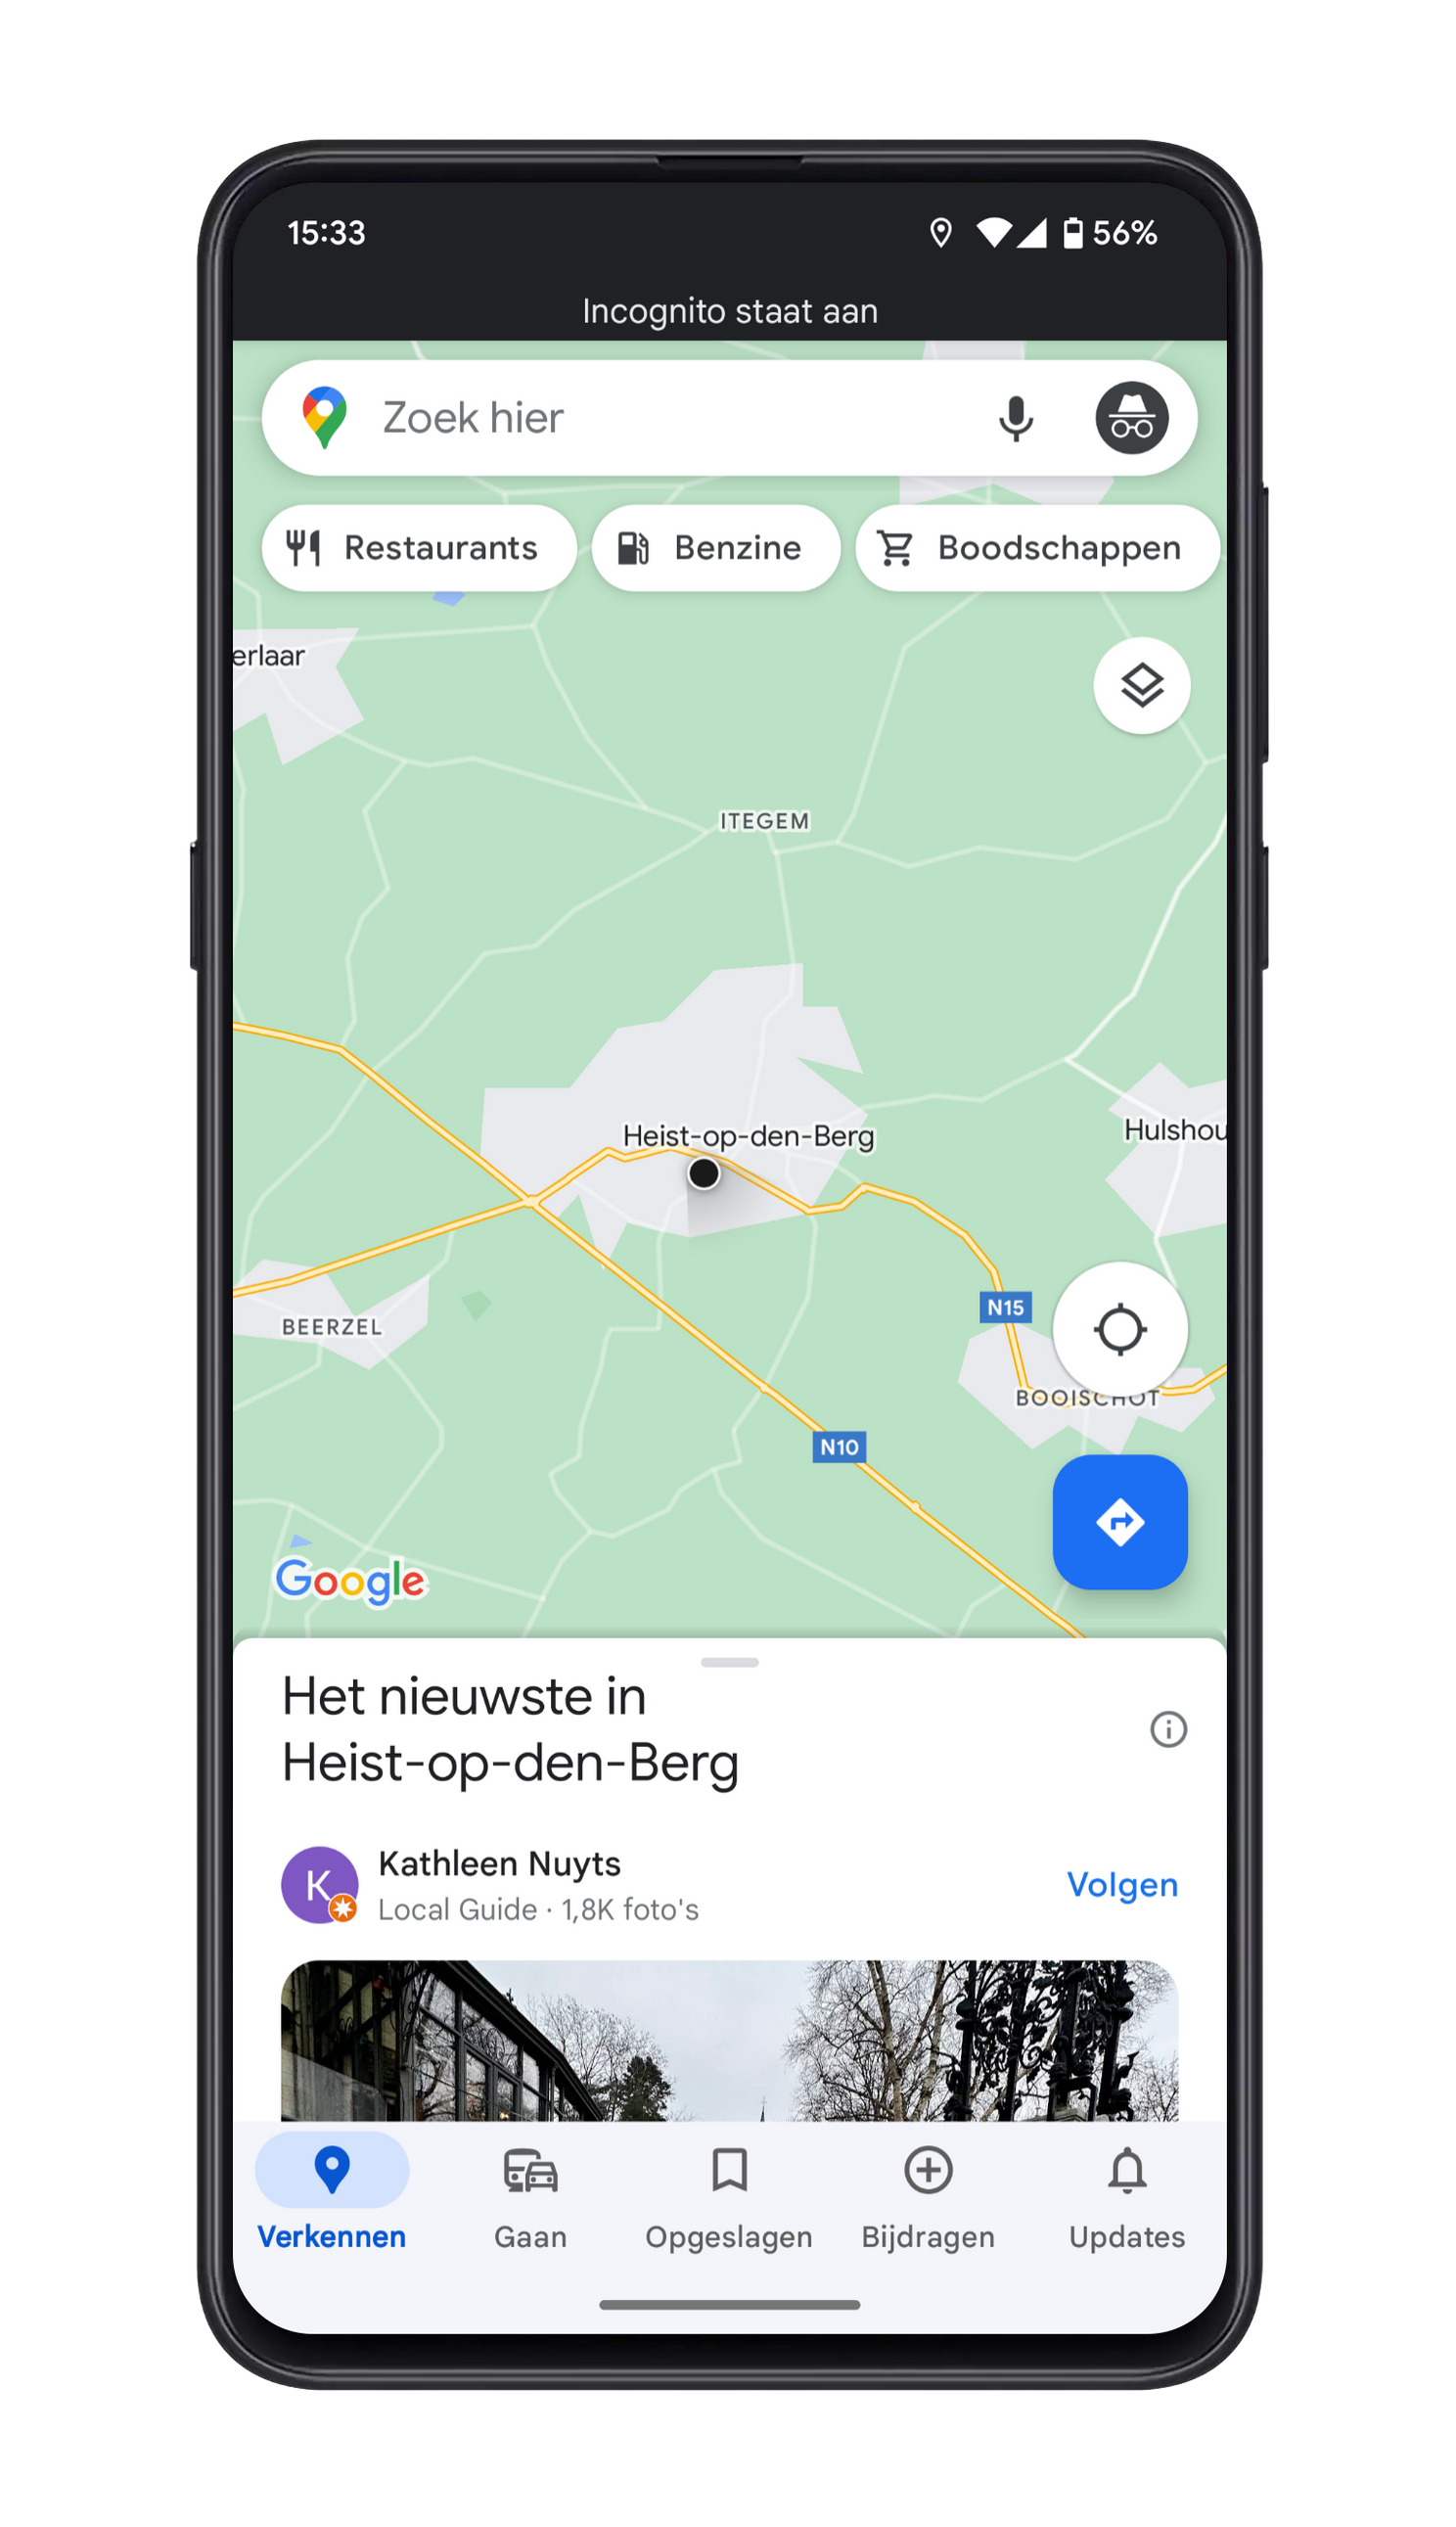 7 handy Google Maps tips that you may not have known